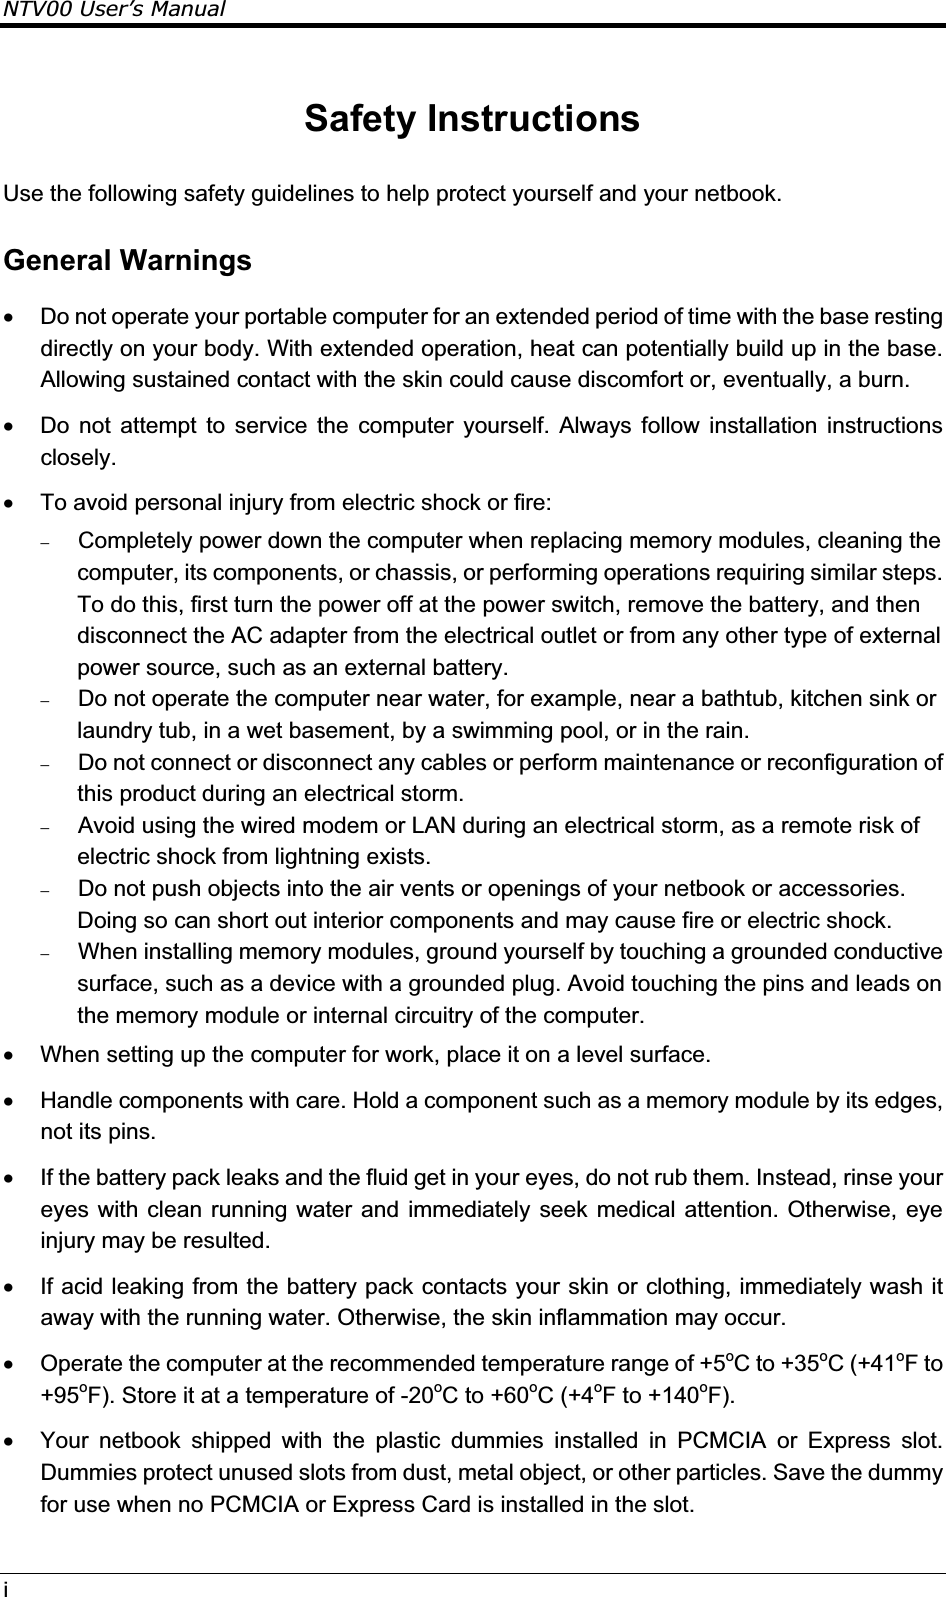 NTV00 User’s ManualiSafety Instructions Use the following safety guidelines to help protect yourself and your netbook. General Warnings x  Do not operate your portable computer for an extended period of time with the base resting directly on your body. With extended operation, heat can potentially build up in the base. Allowing sustained contact with the skin could cause discomfort or, eventually, a burn. x  Do not attempt to service the computer yourself. Always follow installation instructions closely. x  To avoid personal injury from electric shock or fire:  Completely power down the computer when replacing memory modules, cleaning the computer, its components, or chassis, or performing operations requiring similar steps. To do this, first turn the power off at the power switch, remove the battery, and then disconnect the AC adapter from the electrical outlet or from any other type of external power source, such as an external battery.  Do not operate the computer near water, for example, near a bathtub, kitchen sink or laundry tub, in a wet basement, by a swimming pool, or in the rain.   Do not connect or disconnect any cables or perform maintenance or reconfiguration of this product during an electrical storm.  Avoid using the wired modem or LAN during an electrical storm, as a remote risk of electric shock from lightning exists.   Do not push objects into the air vents or openings of your netbook or accessories. Doing so can short out interior components and may cause fire or electric shock.  When installing memory modules, ground yourself by touching a grounded conductive surface, such as a device with a grounded plug. Avoid touching the pins and leads on the memory module or internal circuitry of the computer. x  When setting up the computer for work, place it on a level surface. x  Handle components with care. Hold a component such as a memory module by its edges, not its pins. x  If the battery pack leaks and the fluid get in your eyes, do not rub them. Instead, rinse your eyes with clean running water and immediately seek medical attention. Otherwise, eye injury may be resulted. x  If acid leaking from the battery pack contacts your skin or clothing, immediately wash it away with the running water. Otherwise, the skin inflammation may occur. x  Operate the computer at the recommended temperature range of +5oC to +35oC (+41oF to +95oF). Store it at a temperature of -20oC to +60oC (+4oF to +140oF).x  Your netbook shipped with the plastic dummies installed in PCMCIA or Express slot. Dummies protect unused slots from dust, metal object, or other particles. Save the dummy for use when no PCMCIA or Express Card is installed in the slot.